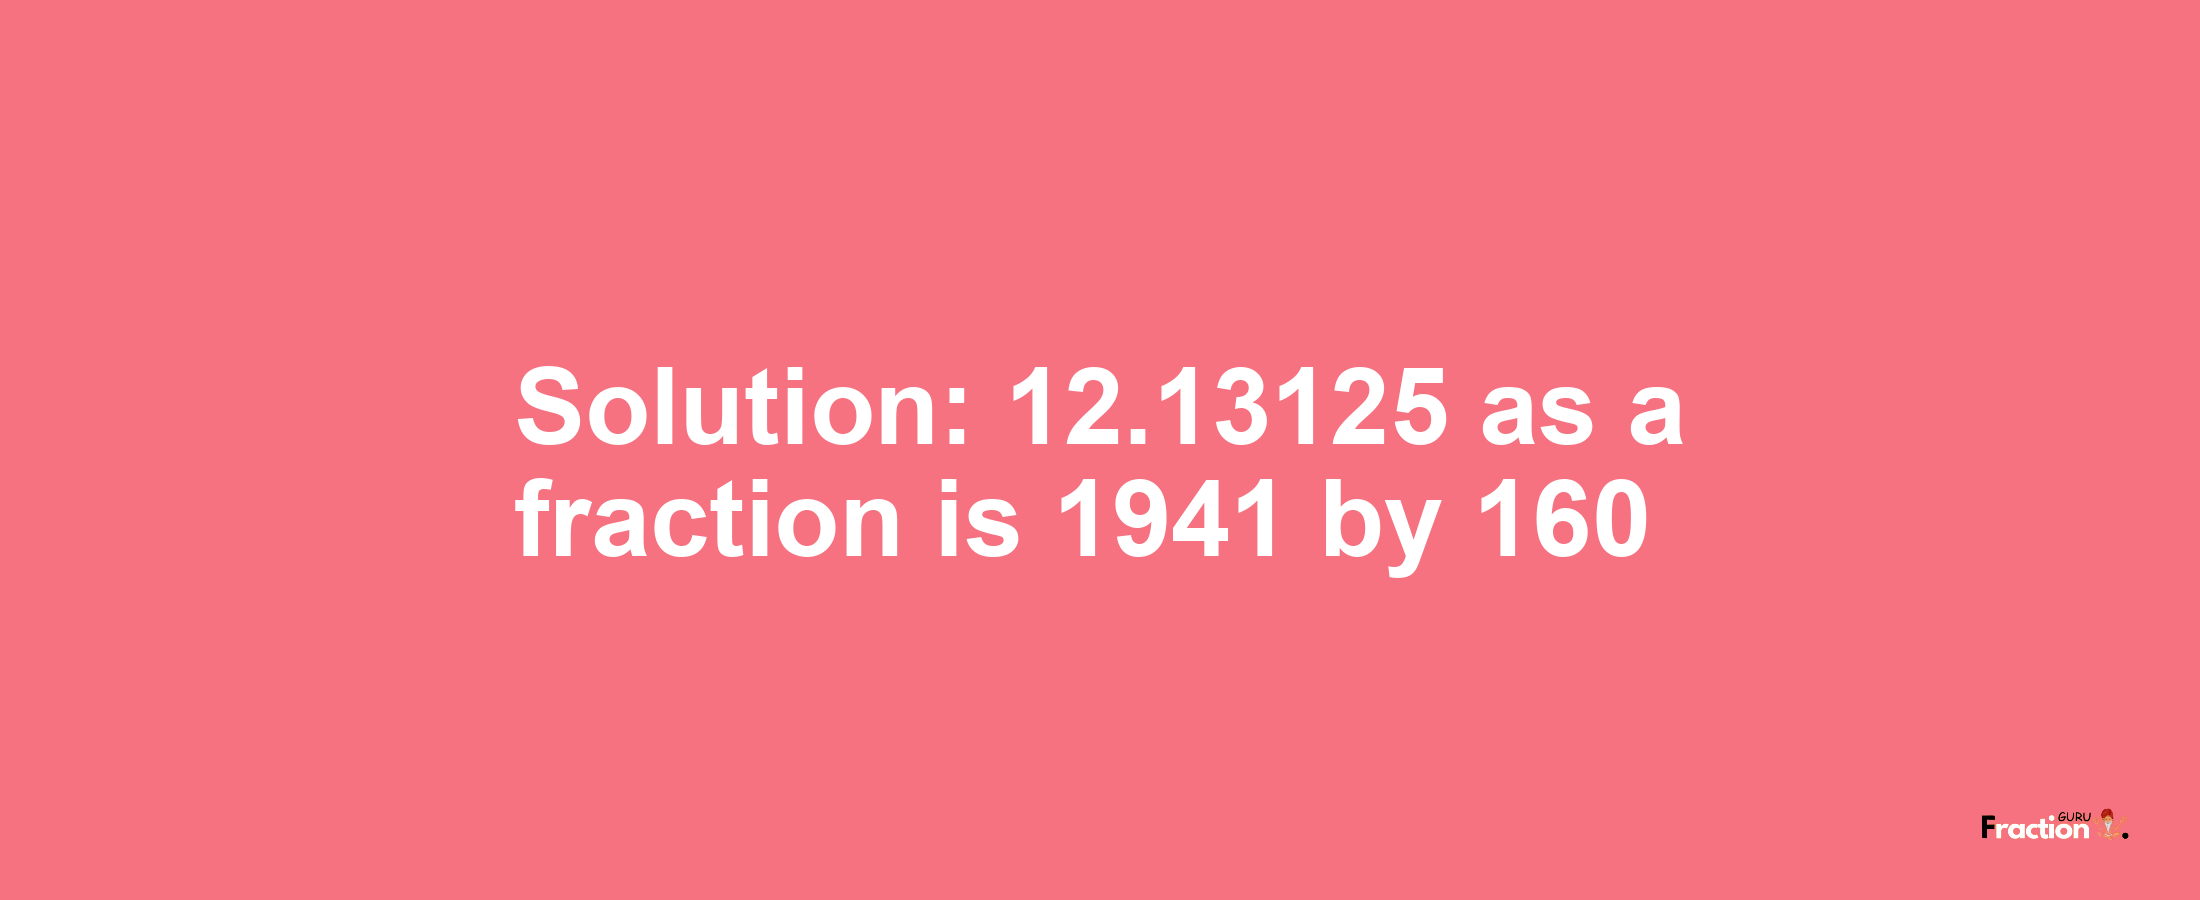 Solution:12.13125 as a fraction is 1941/160